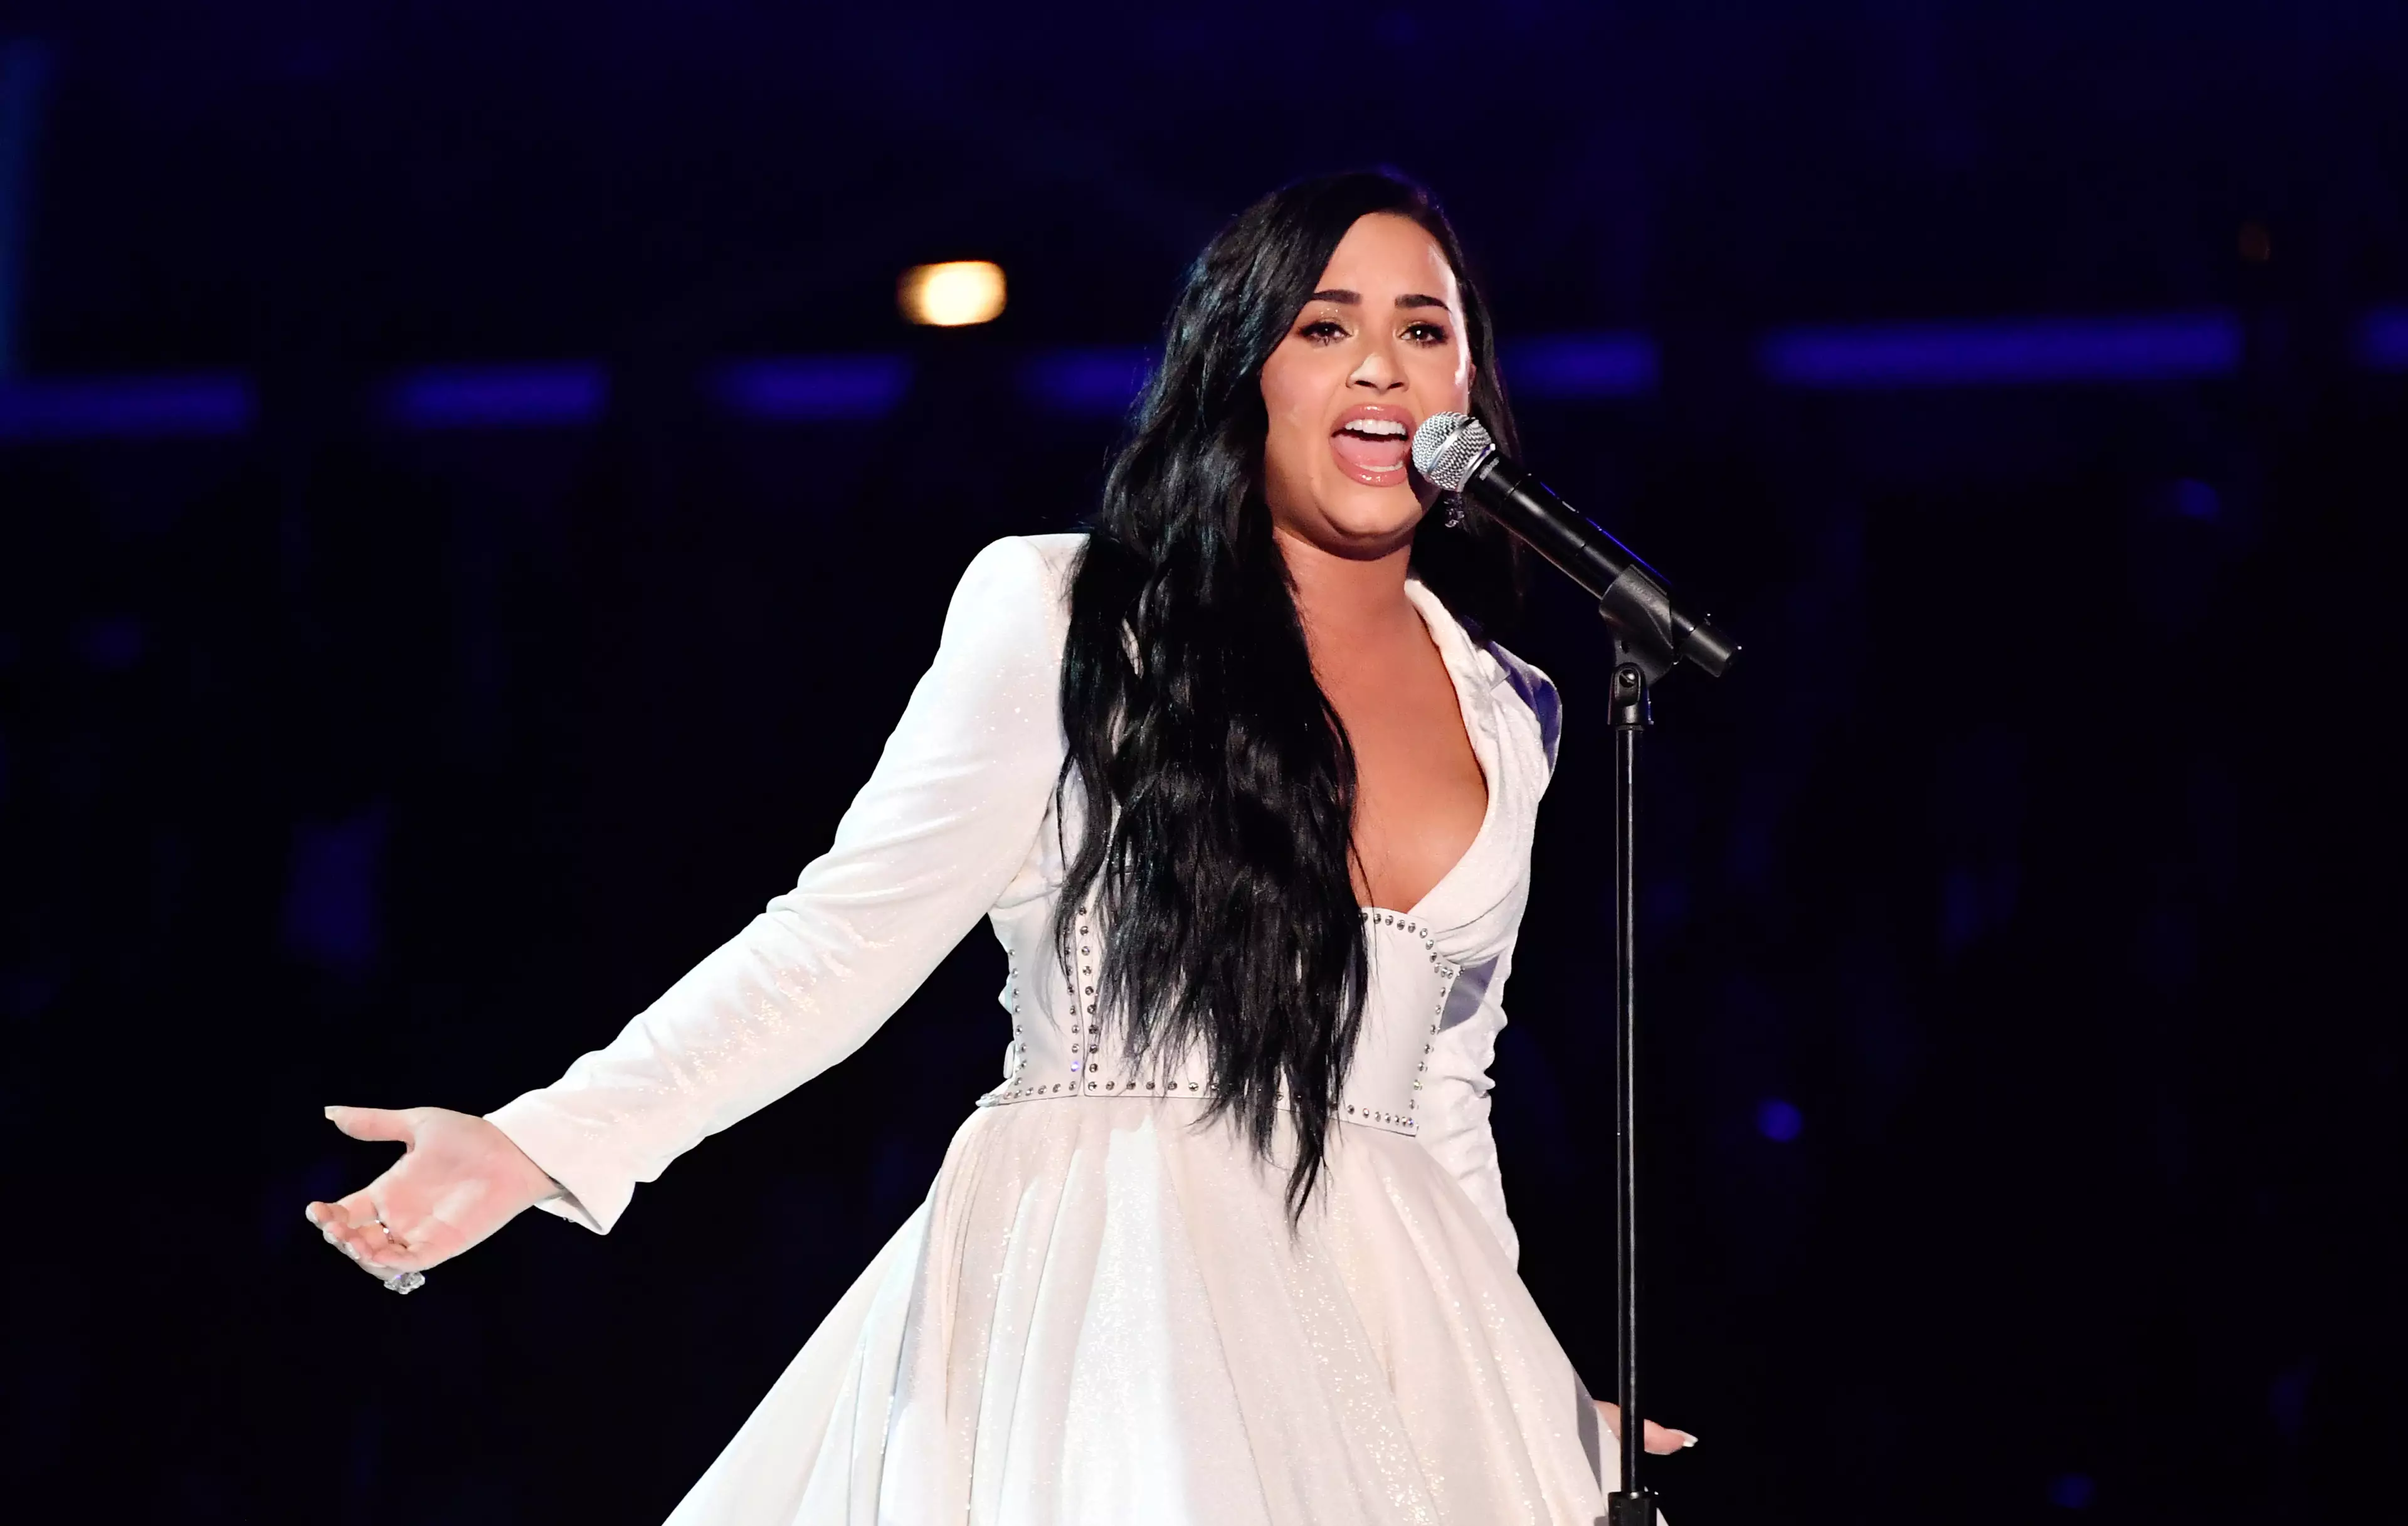 Demi Lovato wrote 'Anyone' four days before she was hospitalised following a drug overdose in 2018.